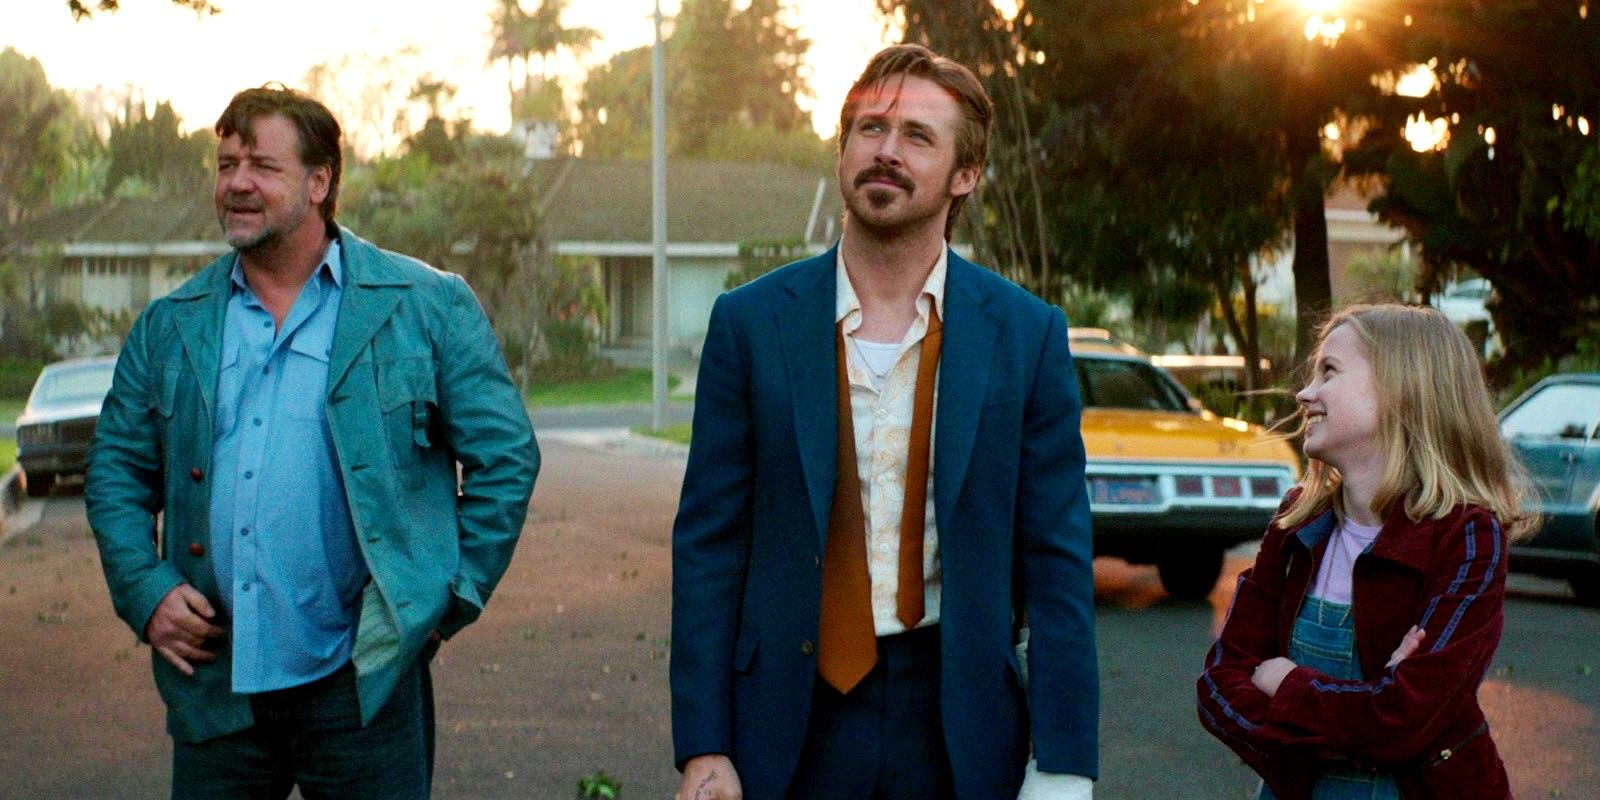 Russell Crowe & Ryan Gosling’s Underrated Comedy Prompts Sequel Demands 7 Years Later